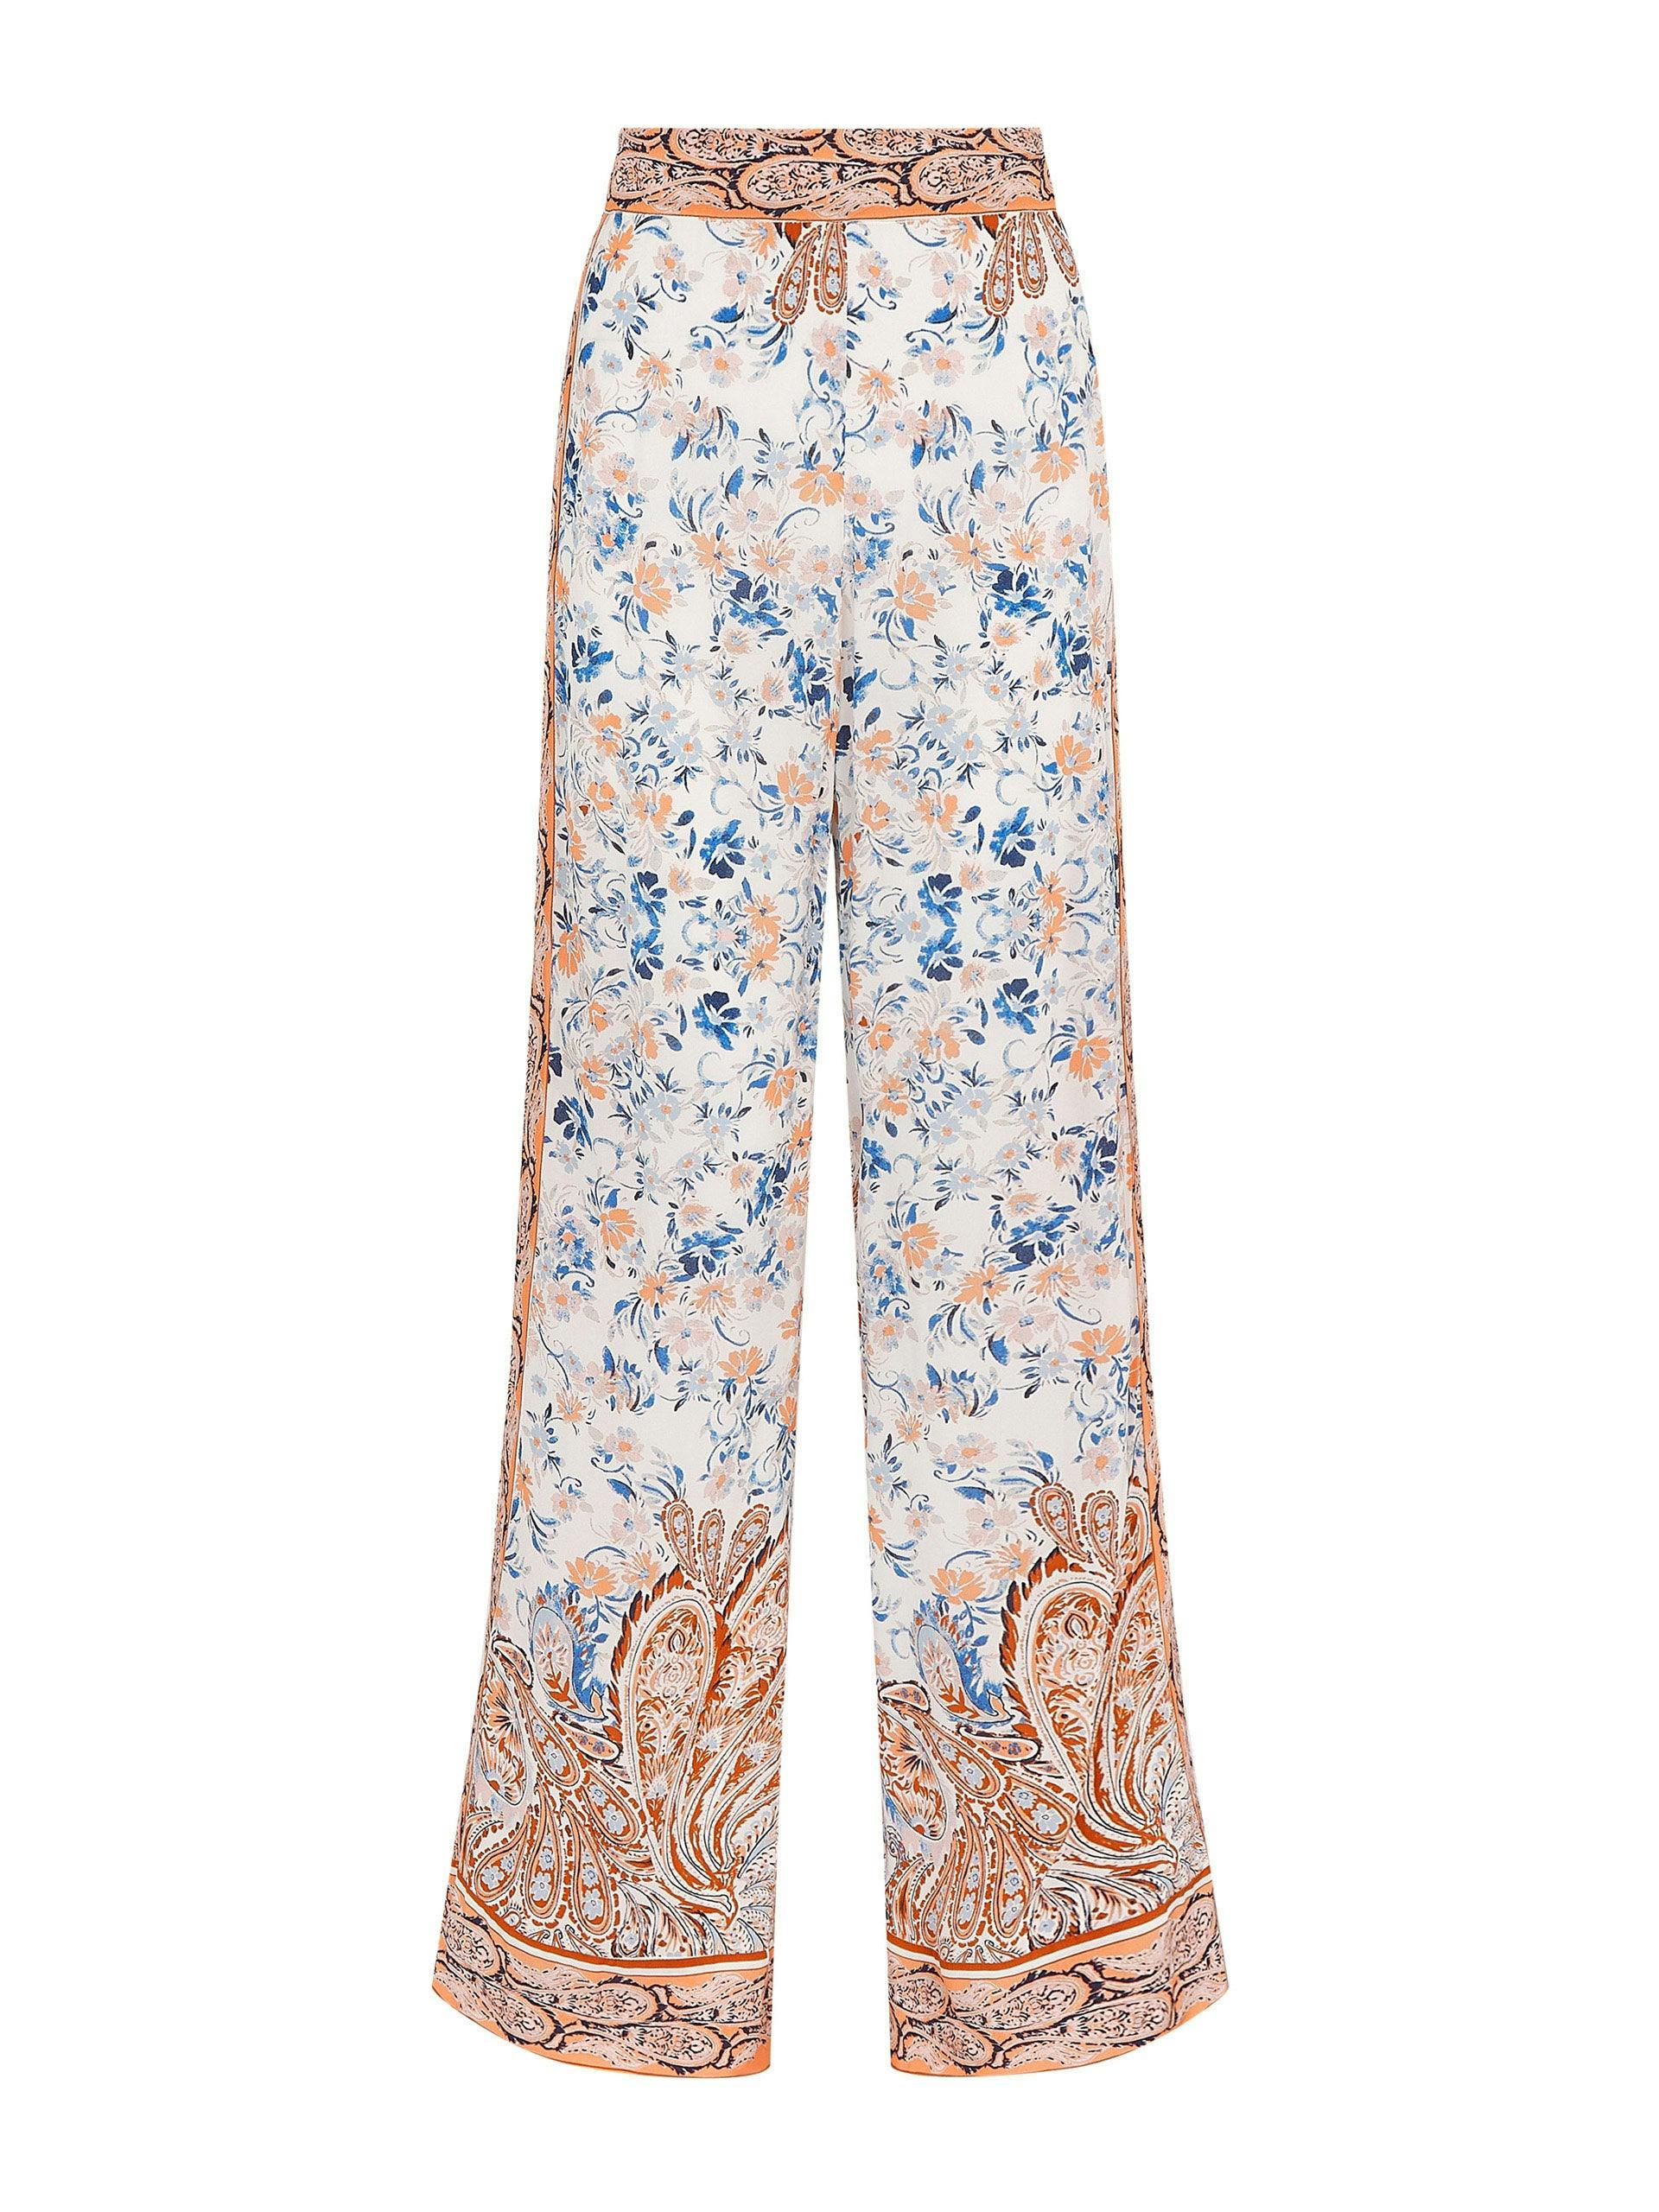 Paisley and floral print Sandy trousers